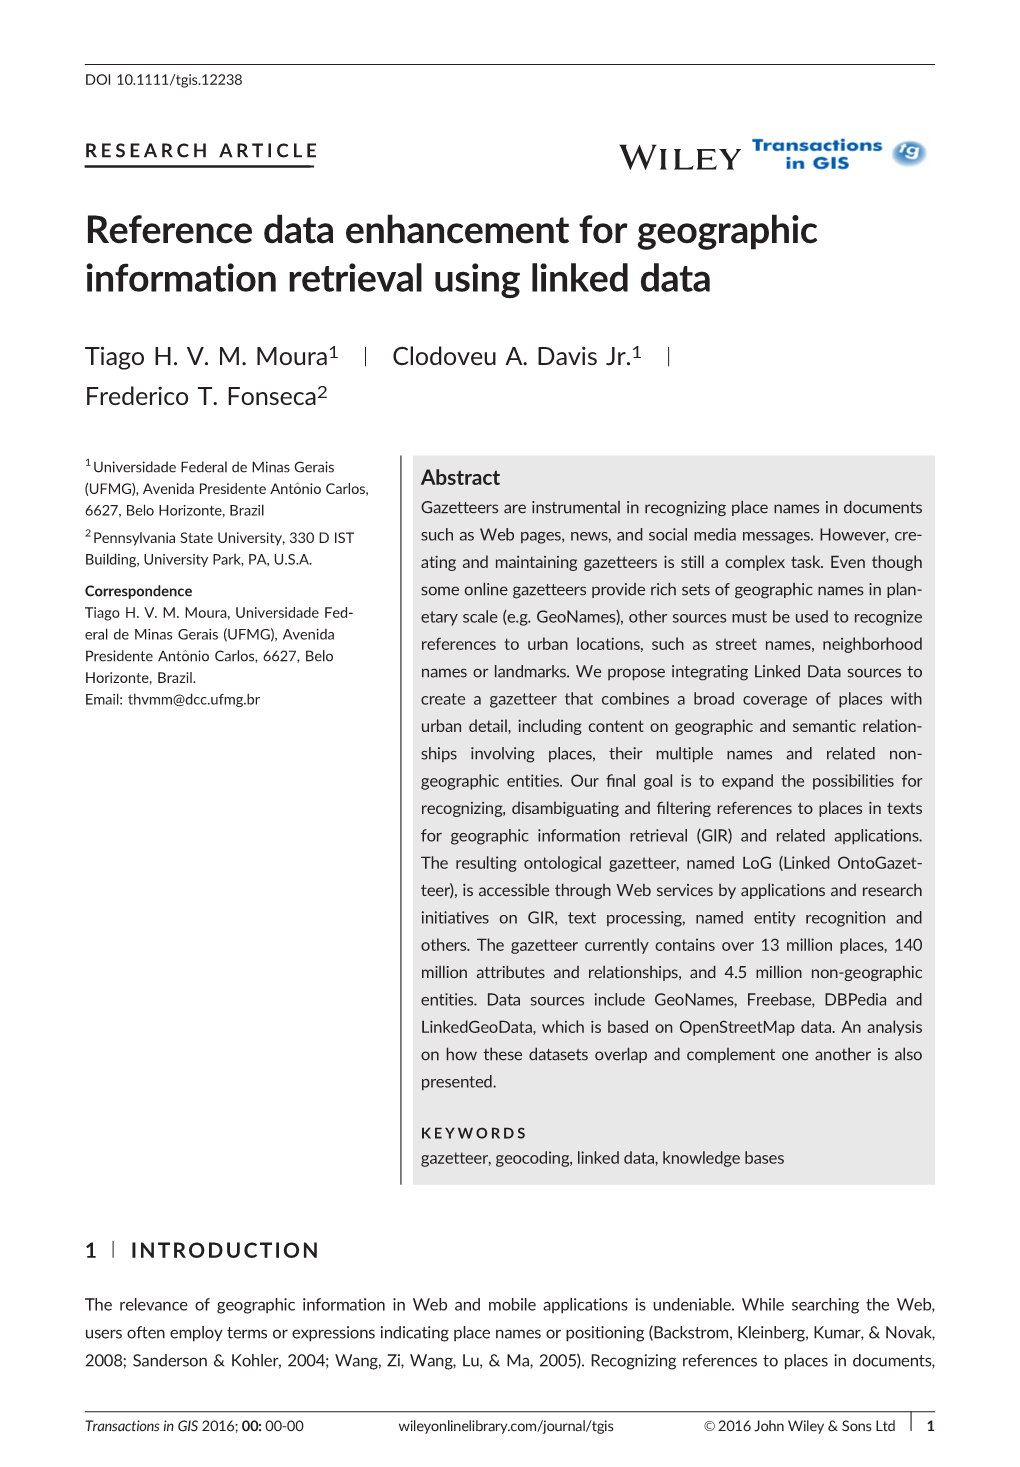 Reference Data Enhancement for Geographic Information Retrieval Using Linked Data